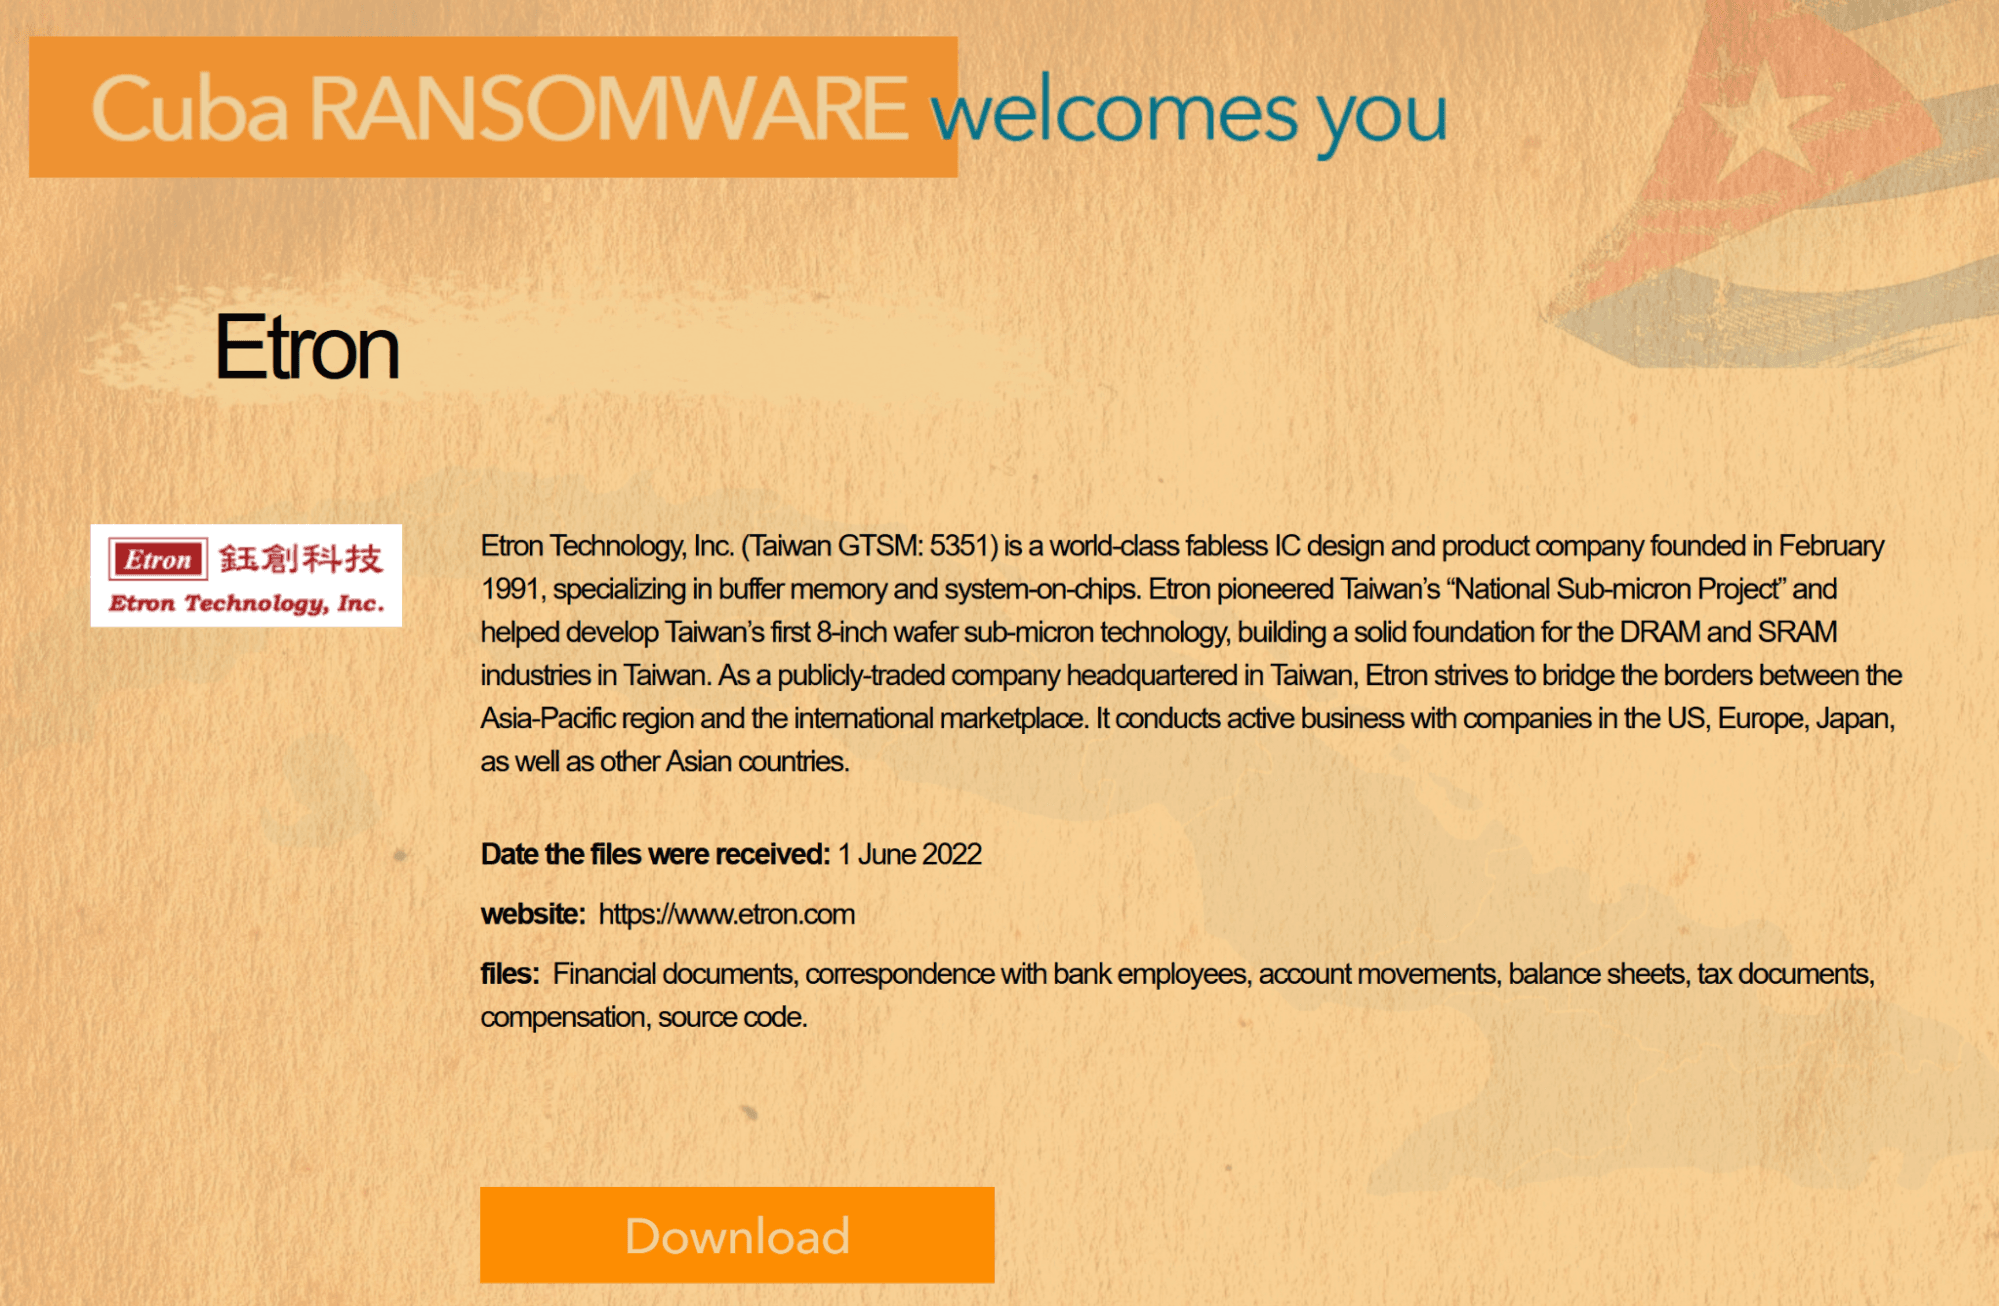 semiconductor_companies_targeted_by_ransomware_figure12.png